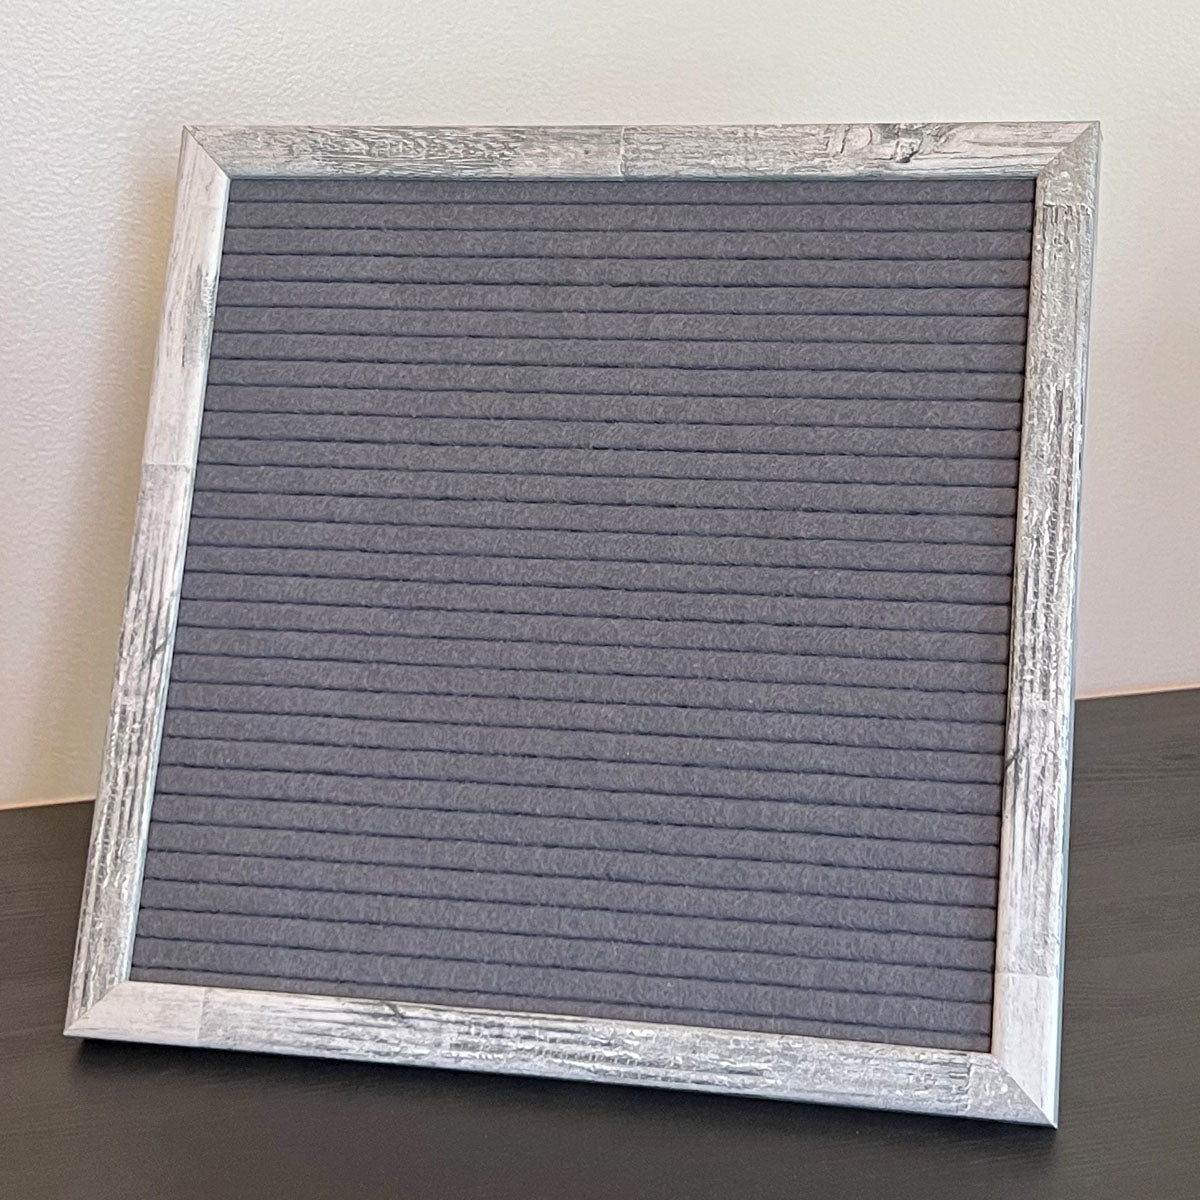 12"x12" Gray Felt Letter Board with Wood Frame - CLEARANCE